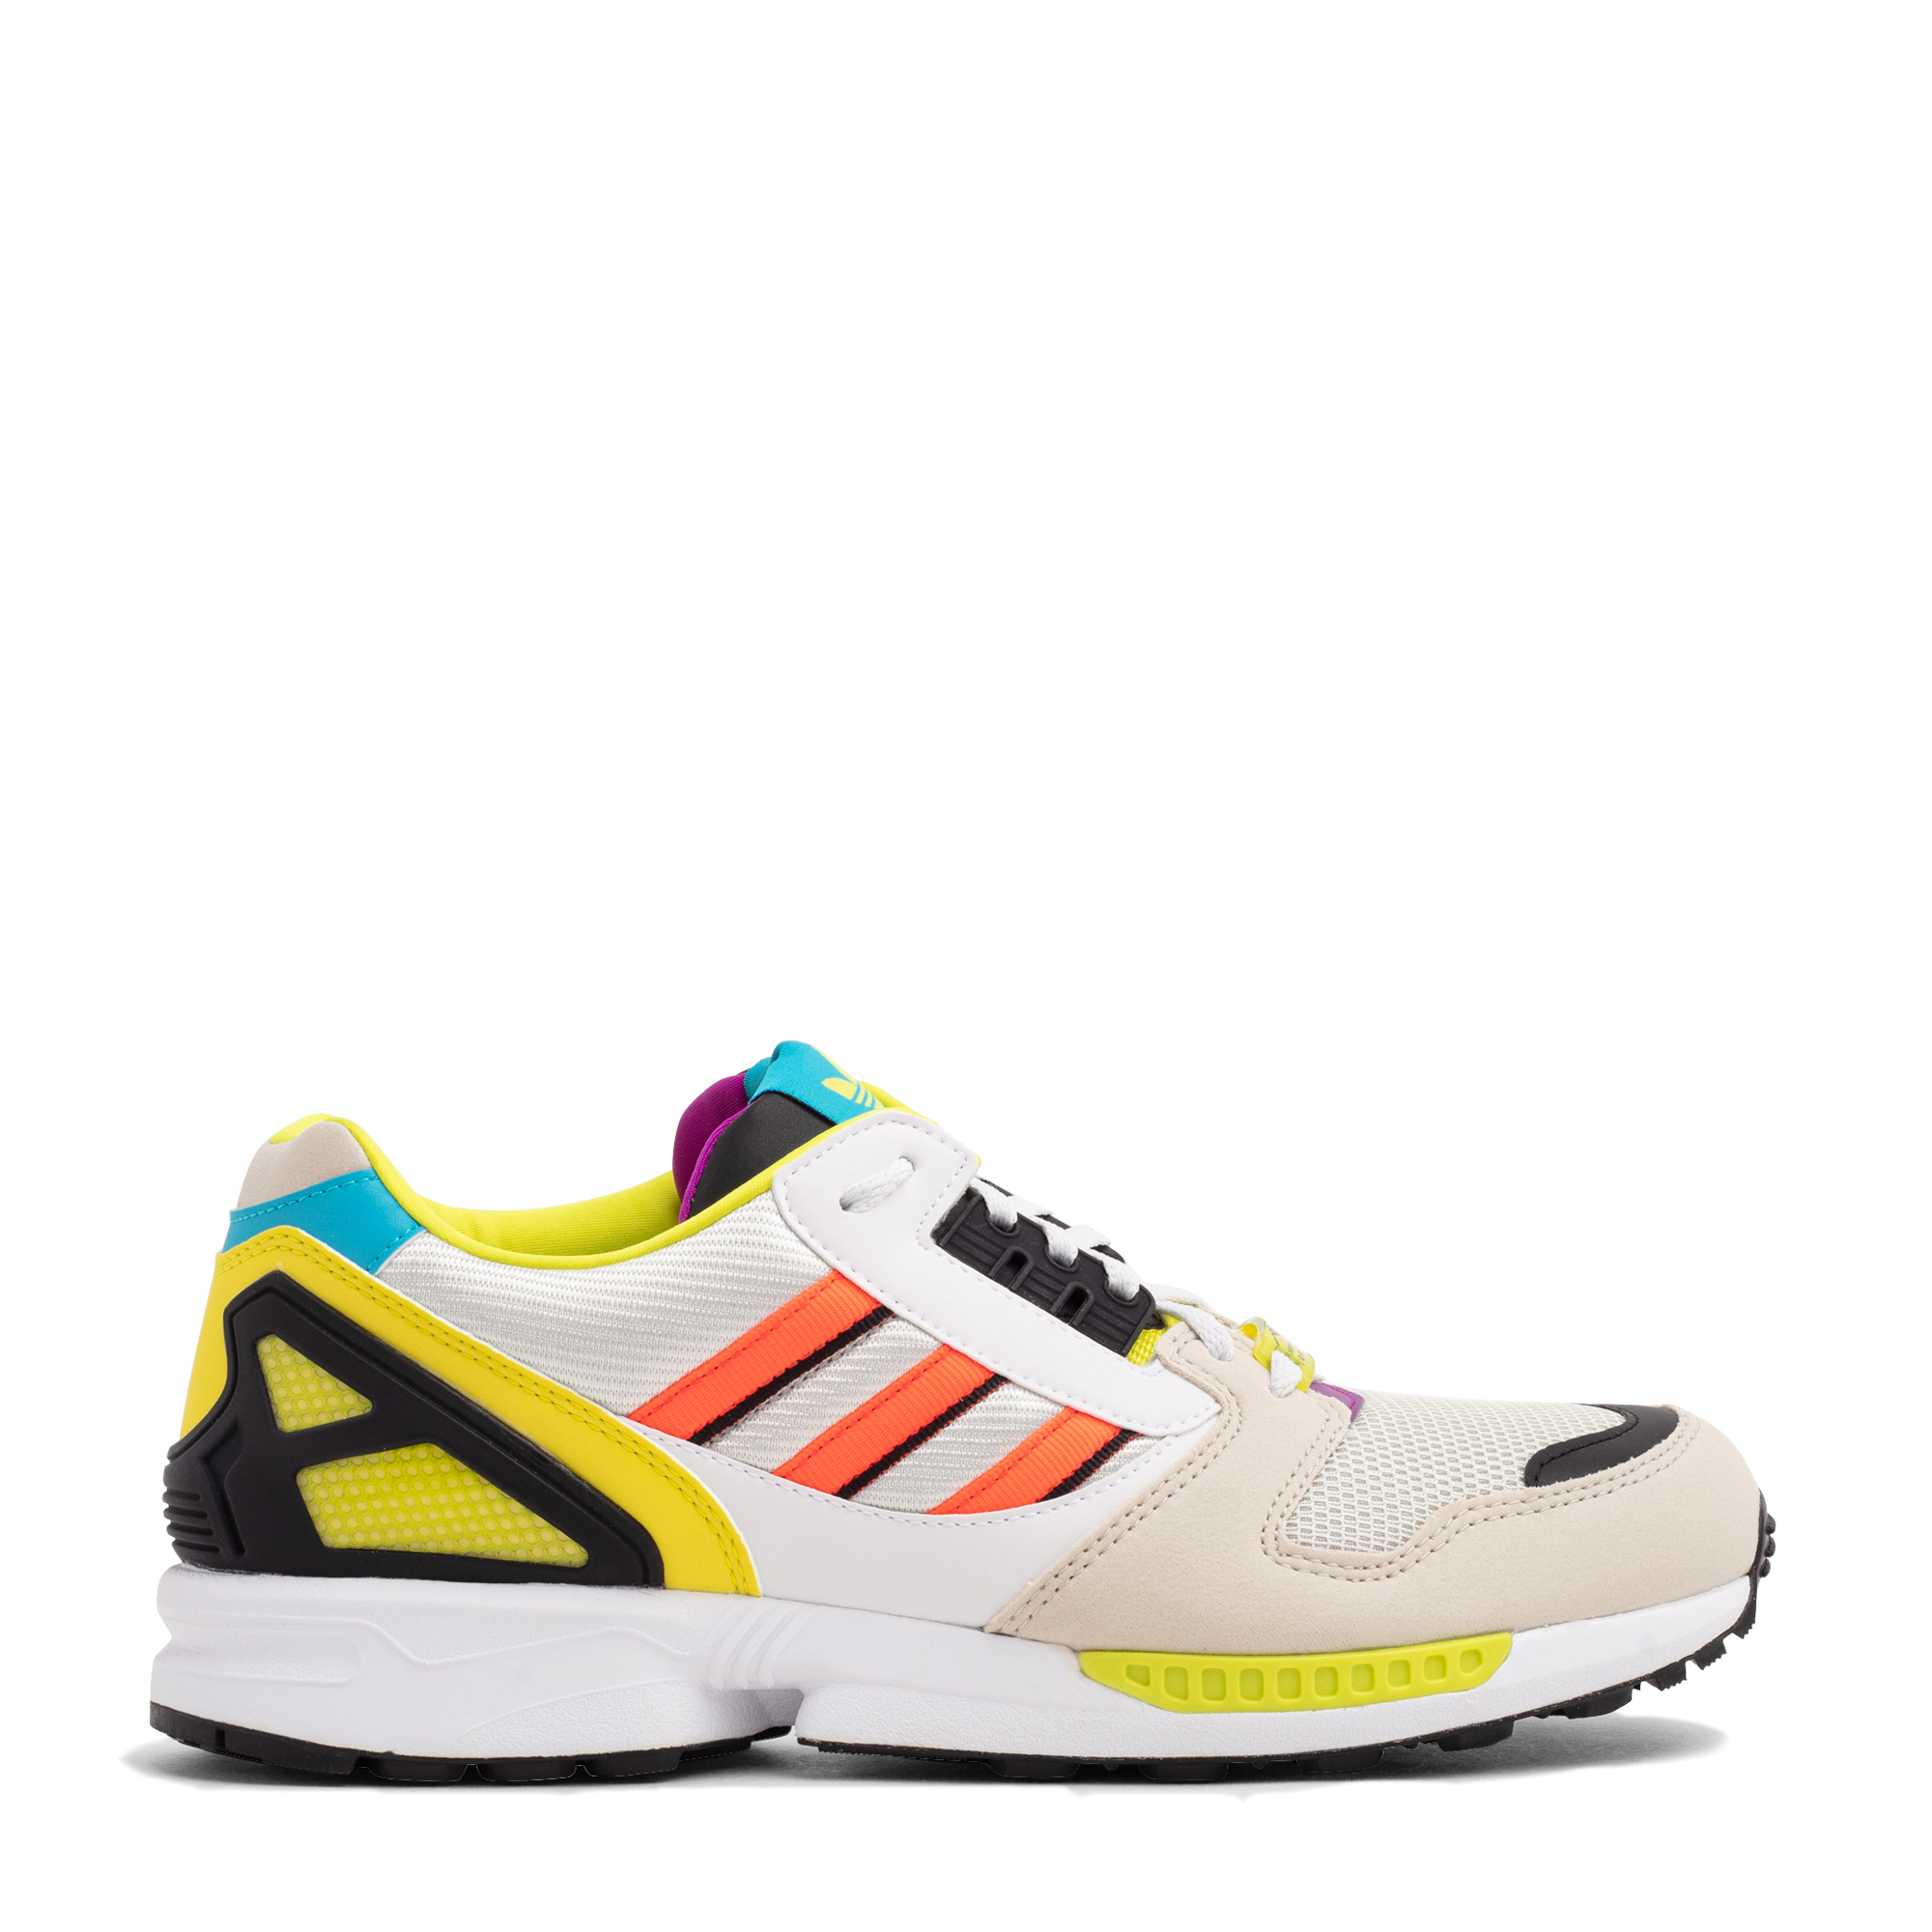 Adidas ZX 8000 sneakers for Men - Multicolored in KSA | Level Shoes